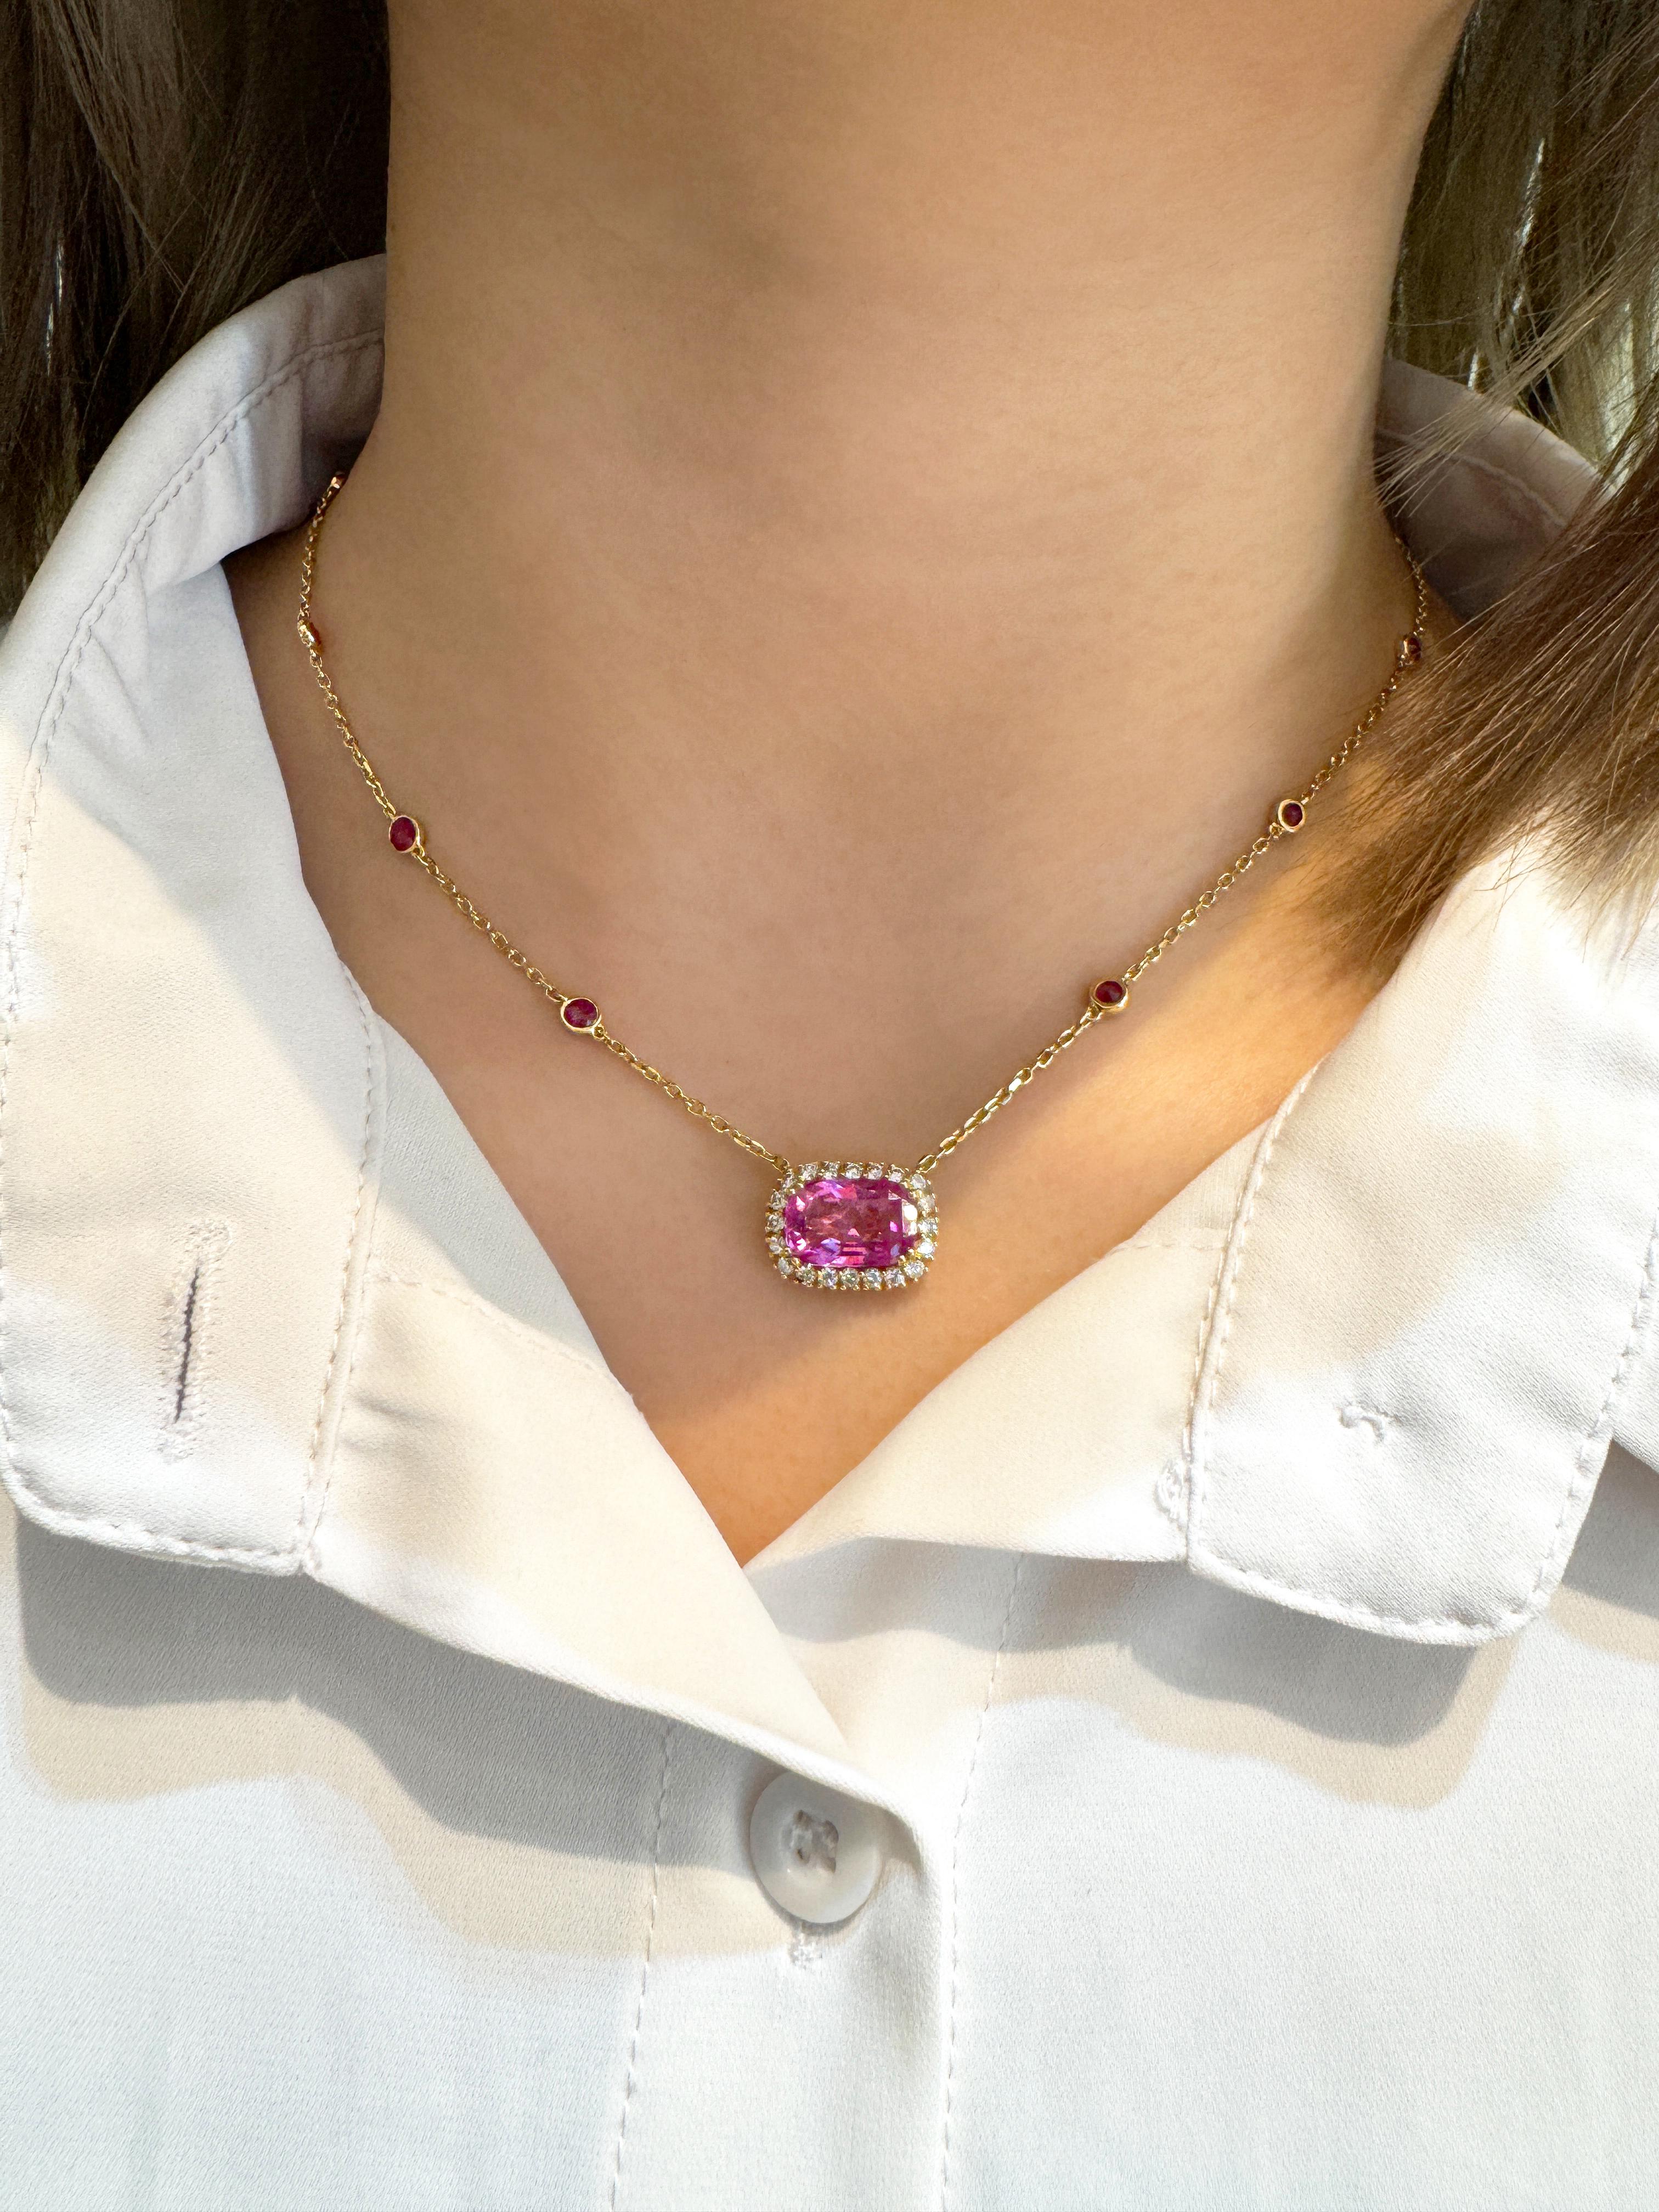 5.10 Carat No Heat Ceylon Pink Sapphire East West Floating Necklace In New Condition For Sale In Miami, FL